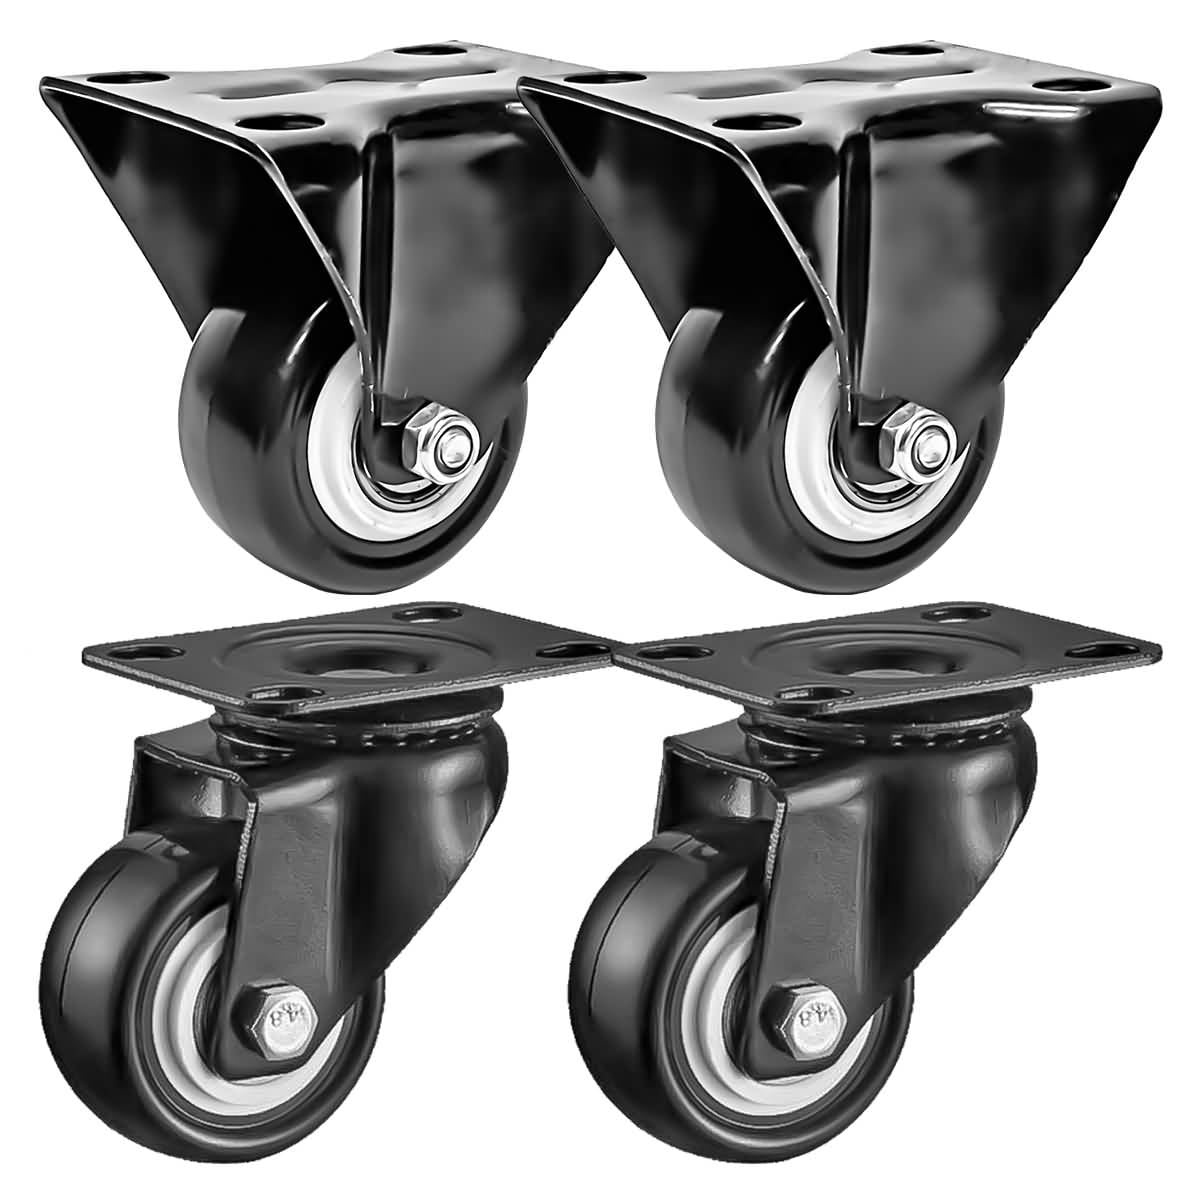 4x 3 Inch ALGOOD Casters Heavy Duty Wheels for VARIOUS USES 